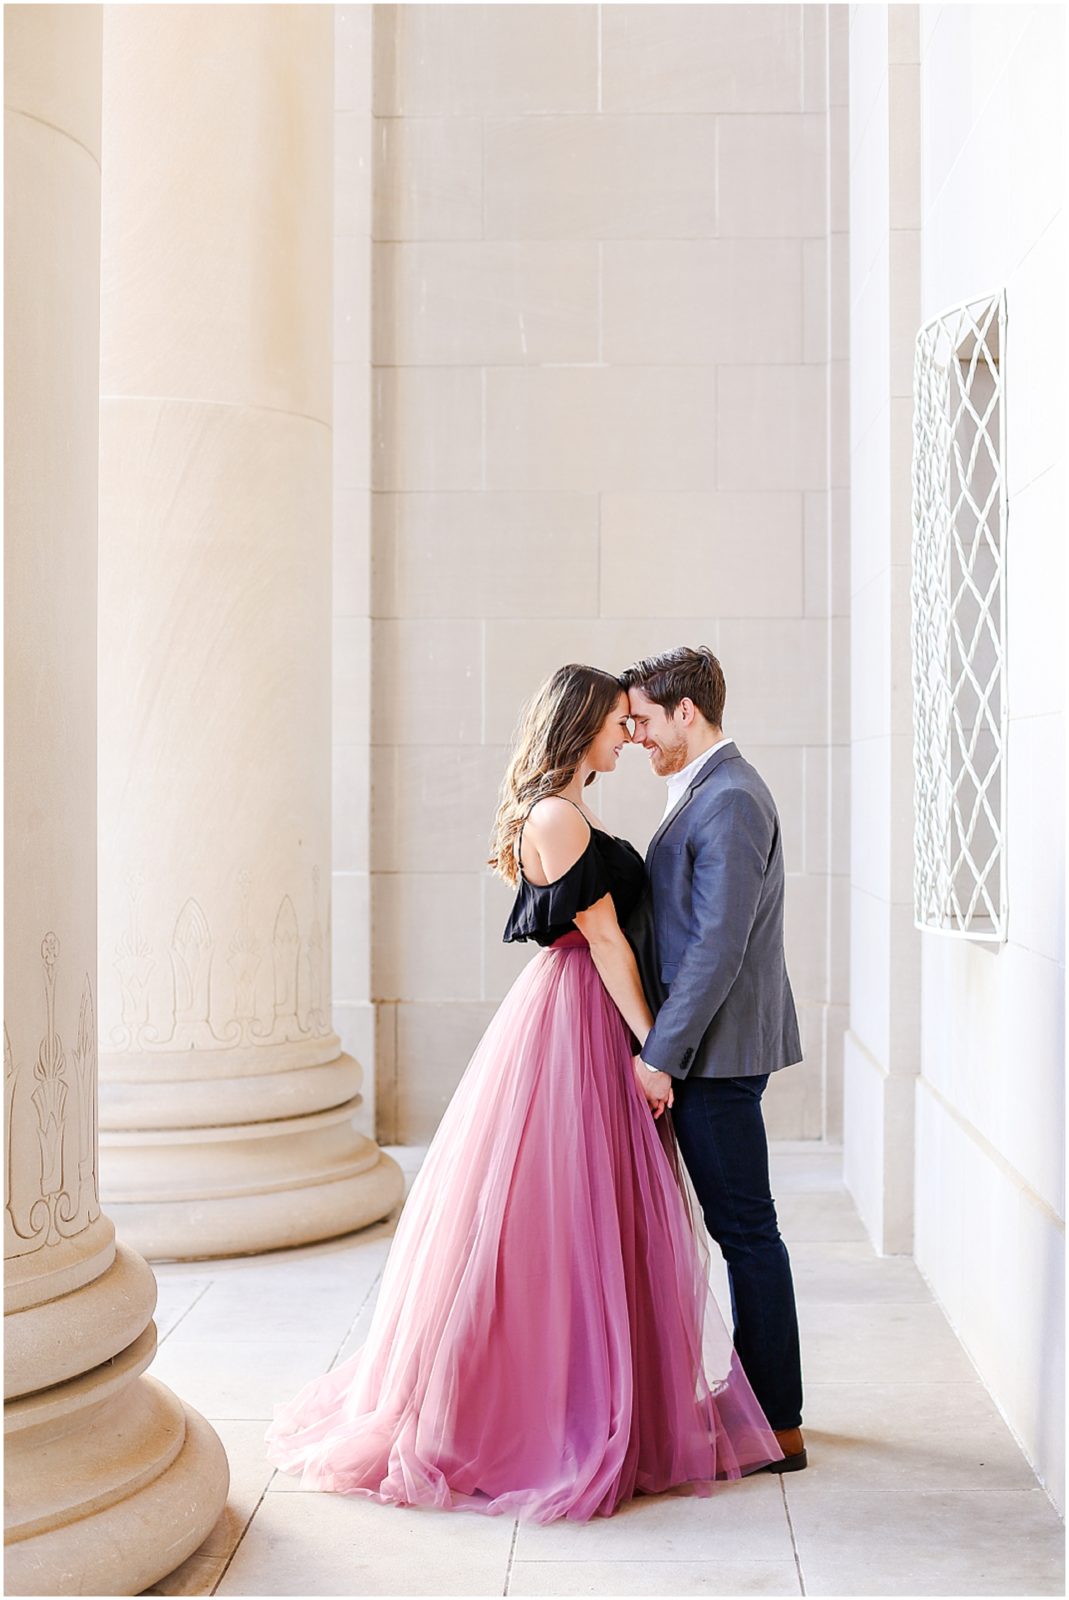 Beautiful Engagement Photos at the Kansas City Nelson Atkins Museum by Mariam Saifan Photography - Where to take photos in KC - What to wear for engagement photos - Kansas City Wedding Photographer